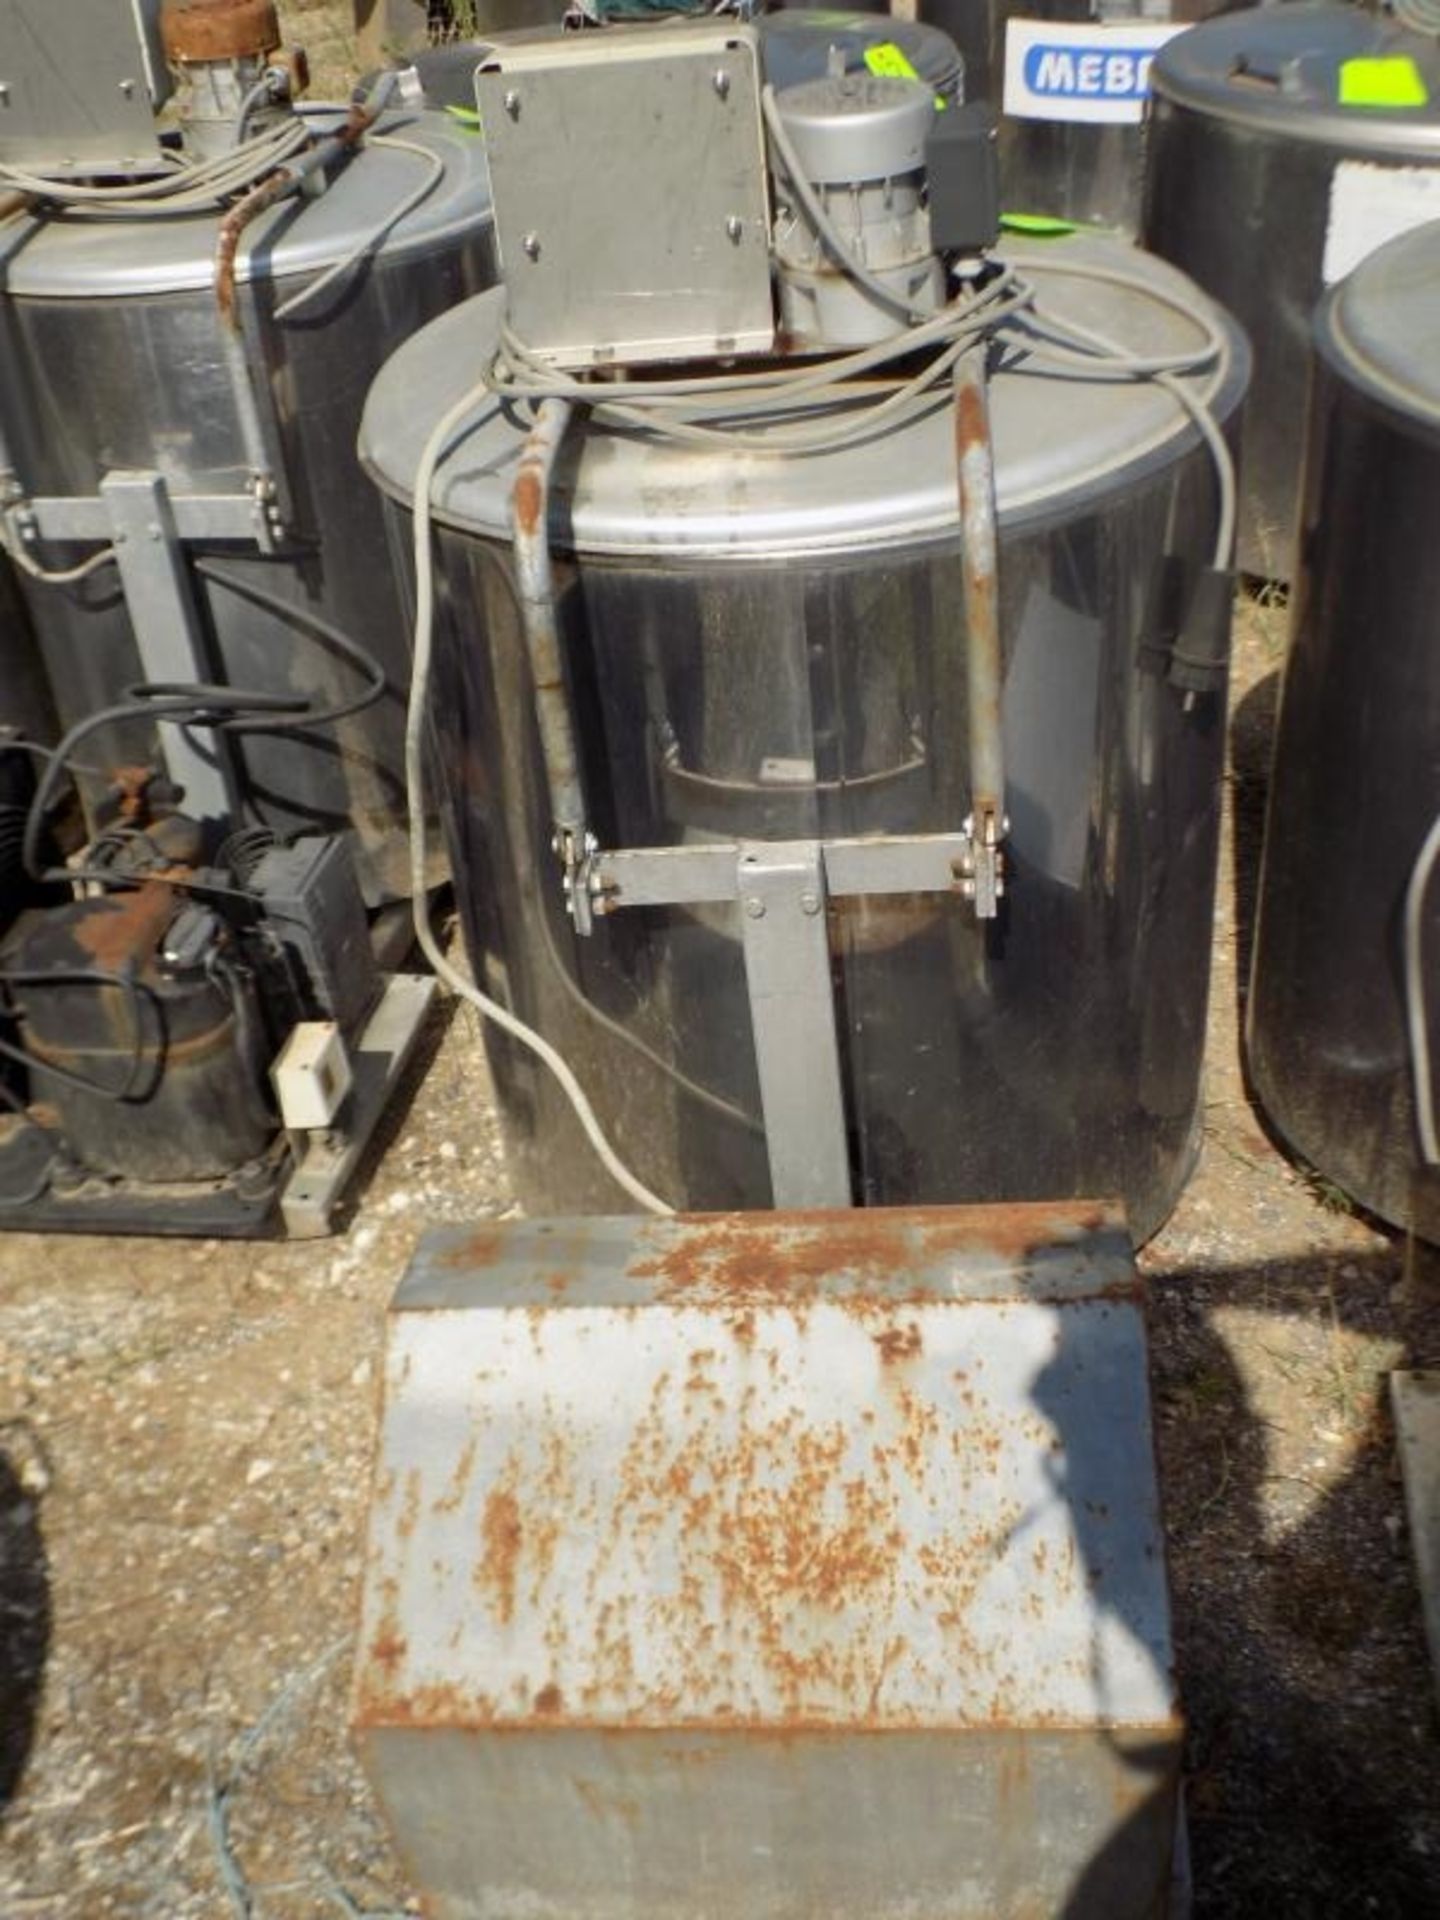 Japy Aprox. 320 L/85 Gal. Jacketed S/S Farm Tank with Hinged Lid, Twin Blade Prop, Motor with - Image 4 of 4